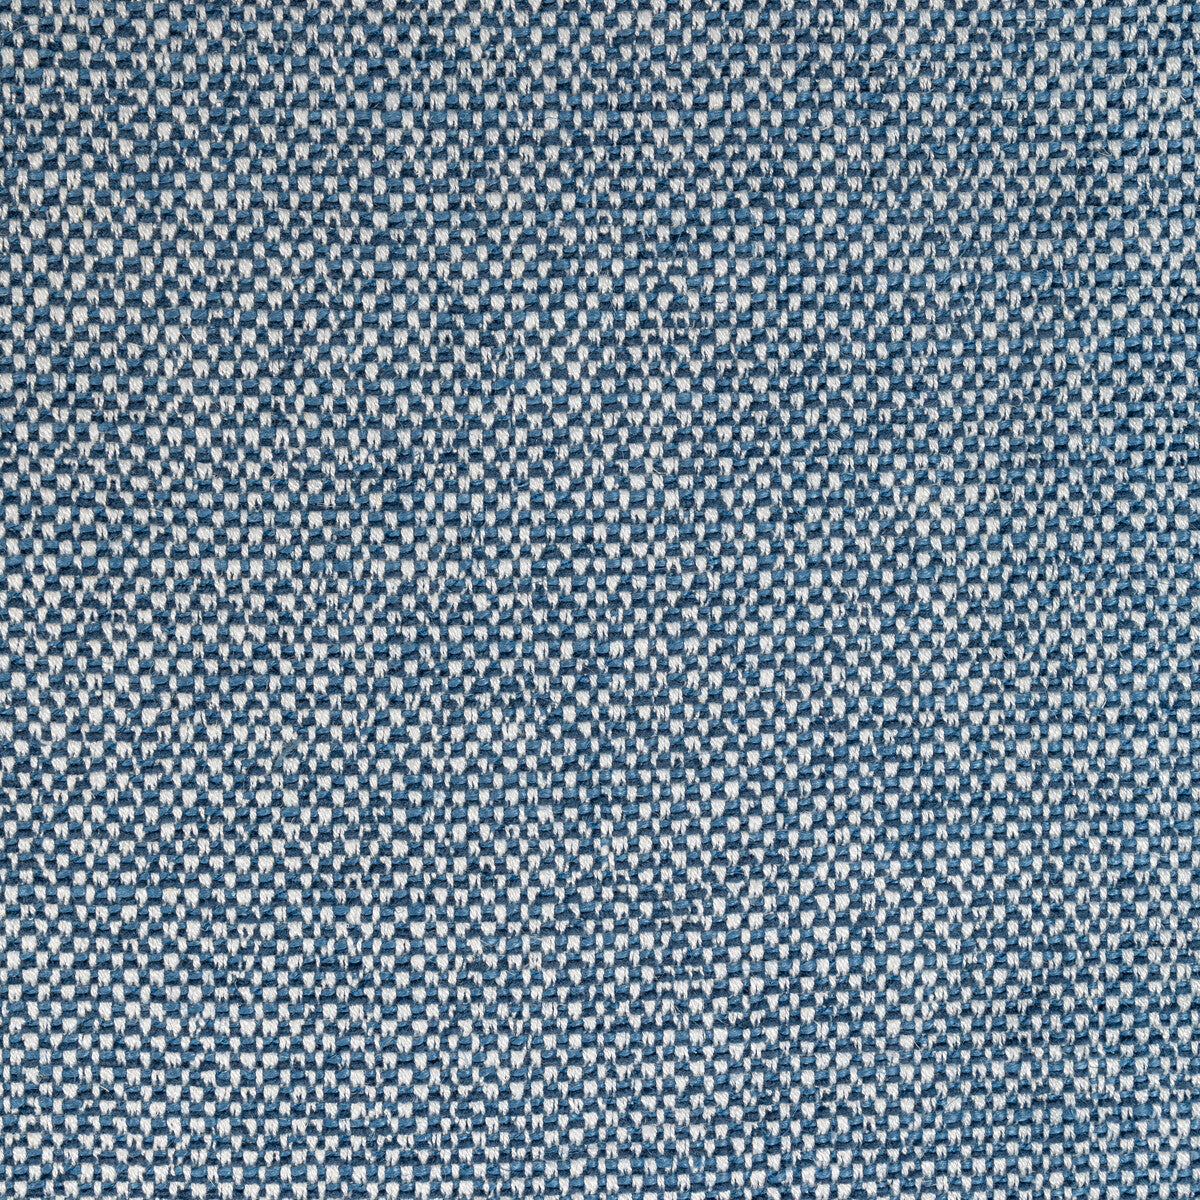 Edern Plain fabric in blue color - pattern 8022109.5.0 - by Brunschwig &amp; Fils in the Lorient Weaves collection